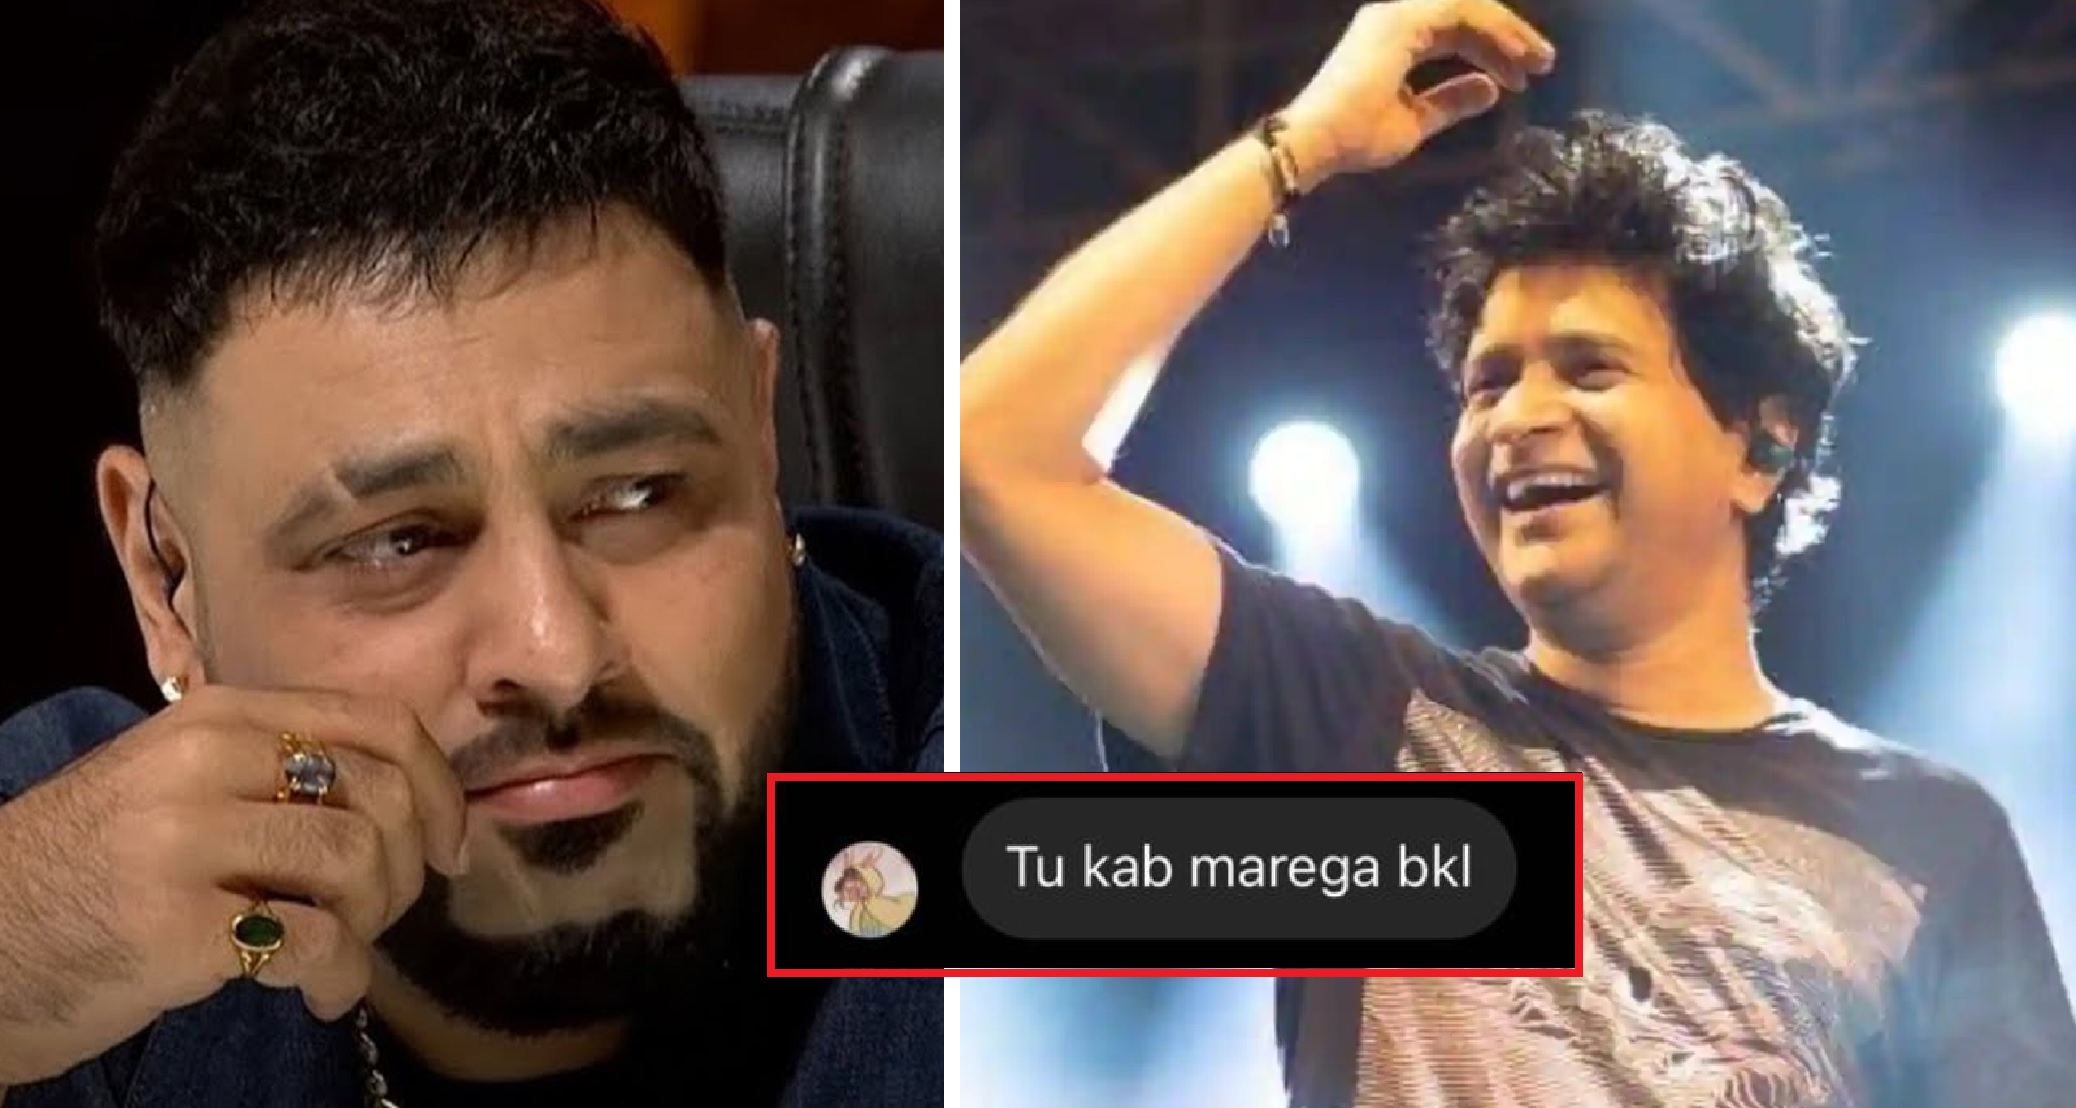 “Tu Kab Marega”: Badshah Gets Hate Message After Paying Tribute To KK, Here’s How He Responded